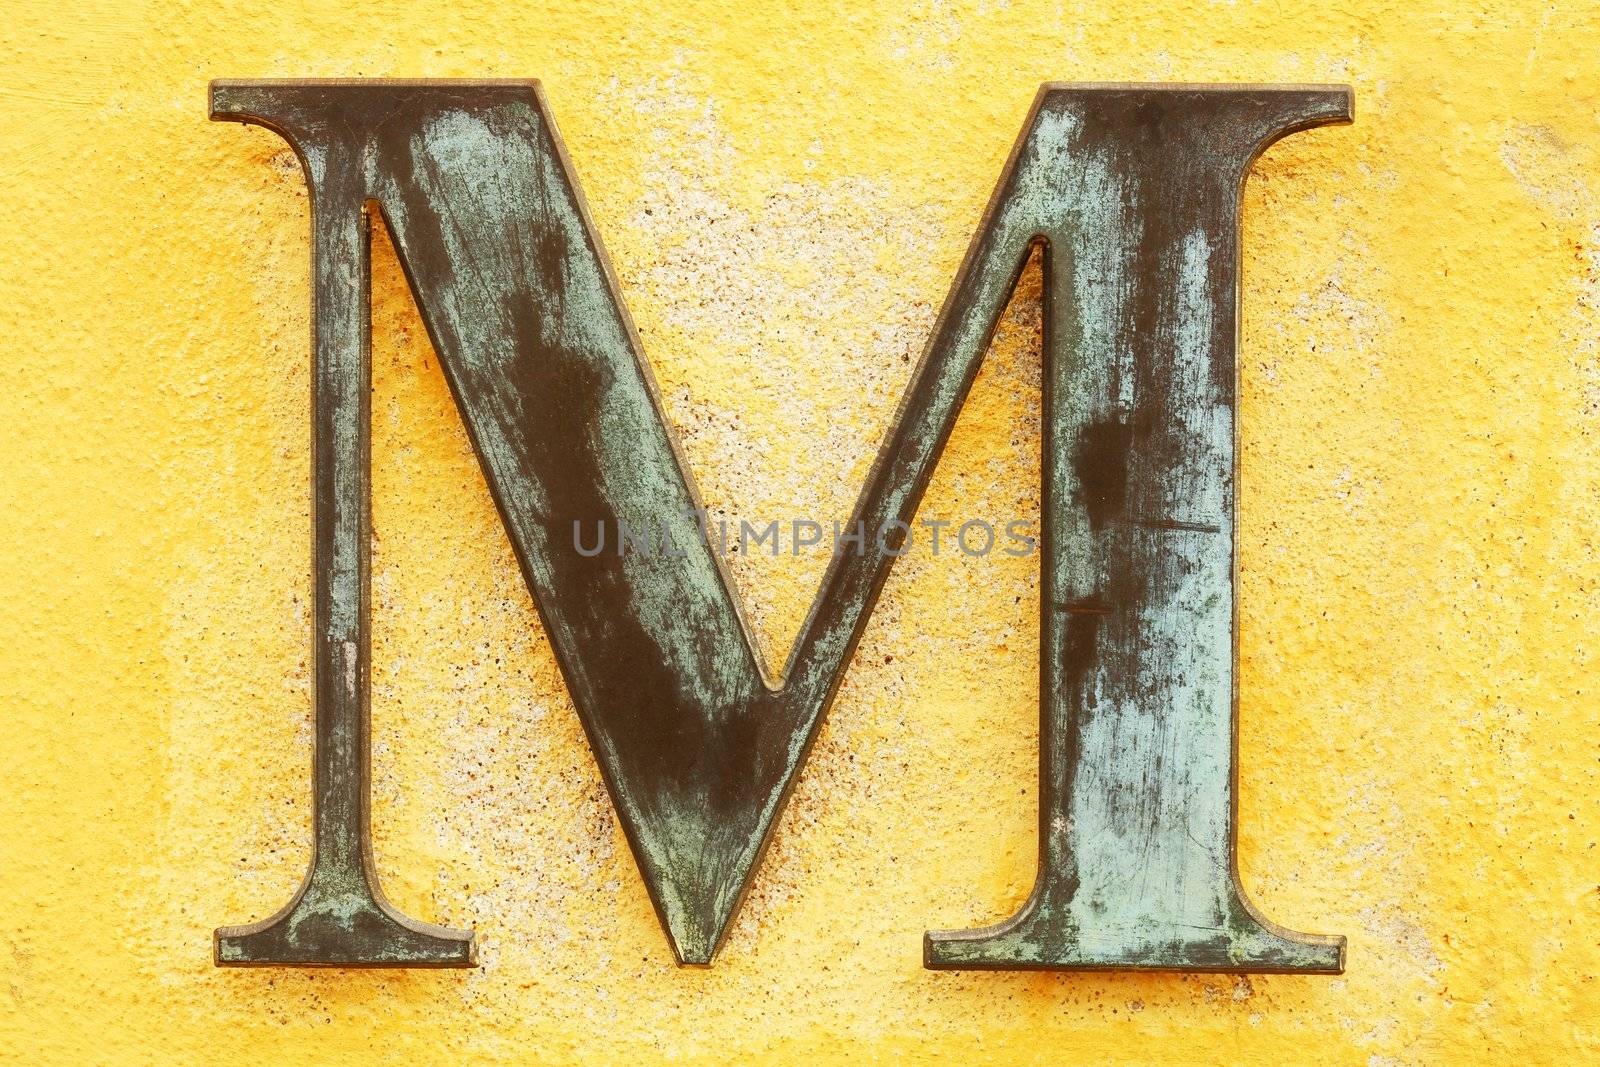 M by Stocksnapper